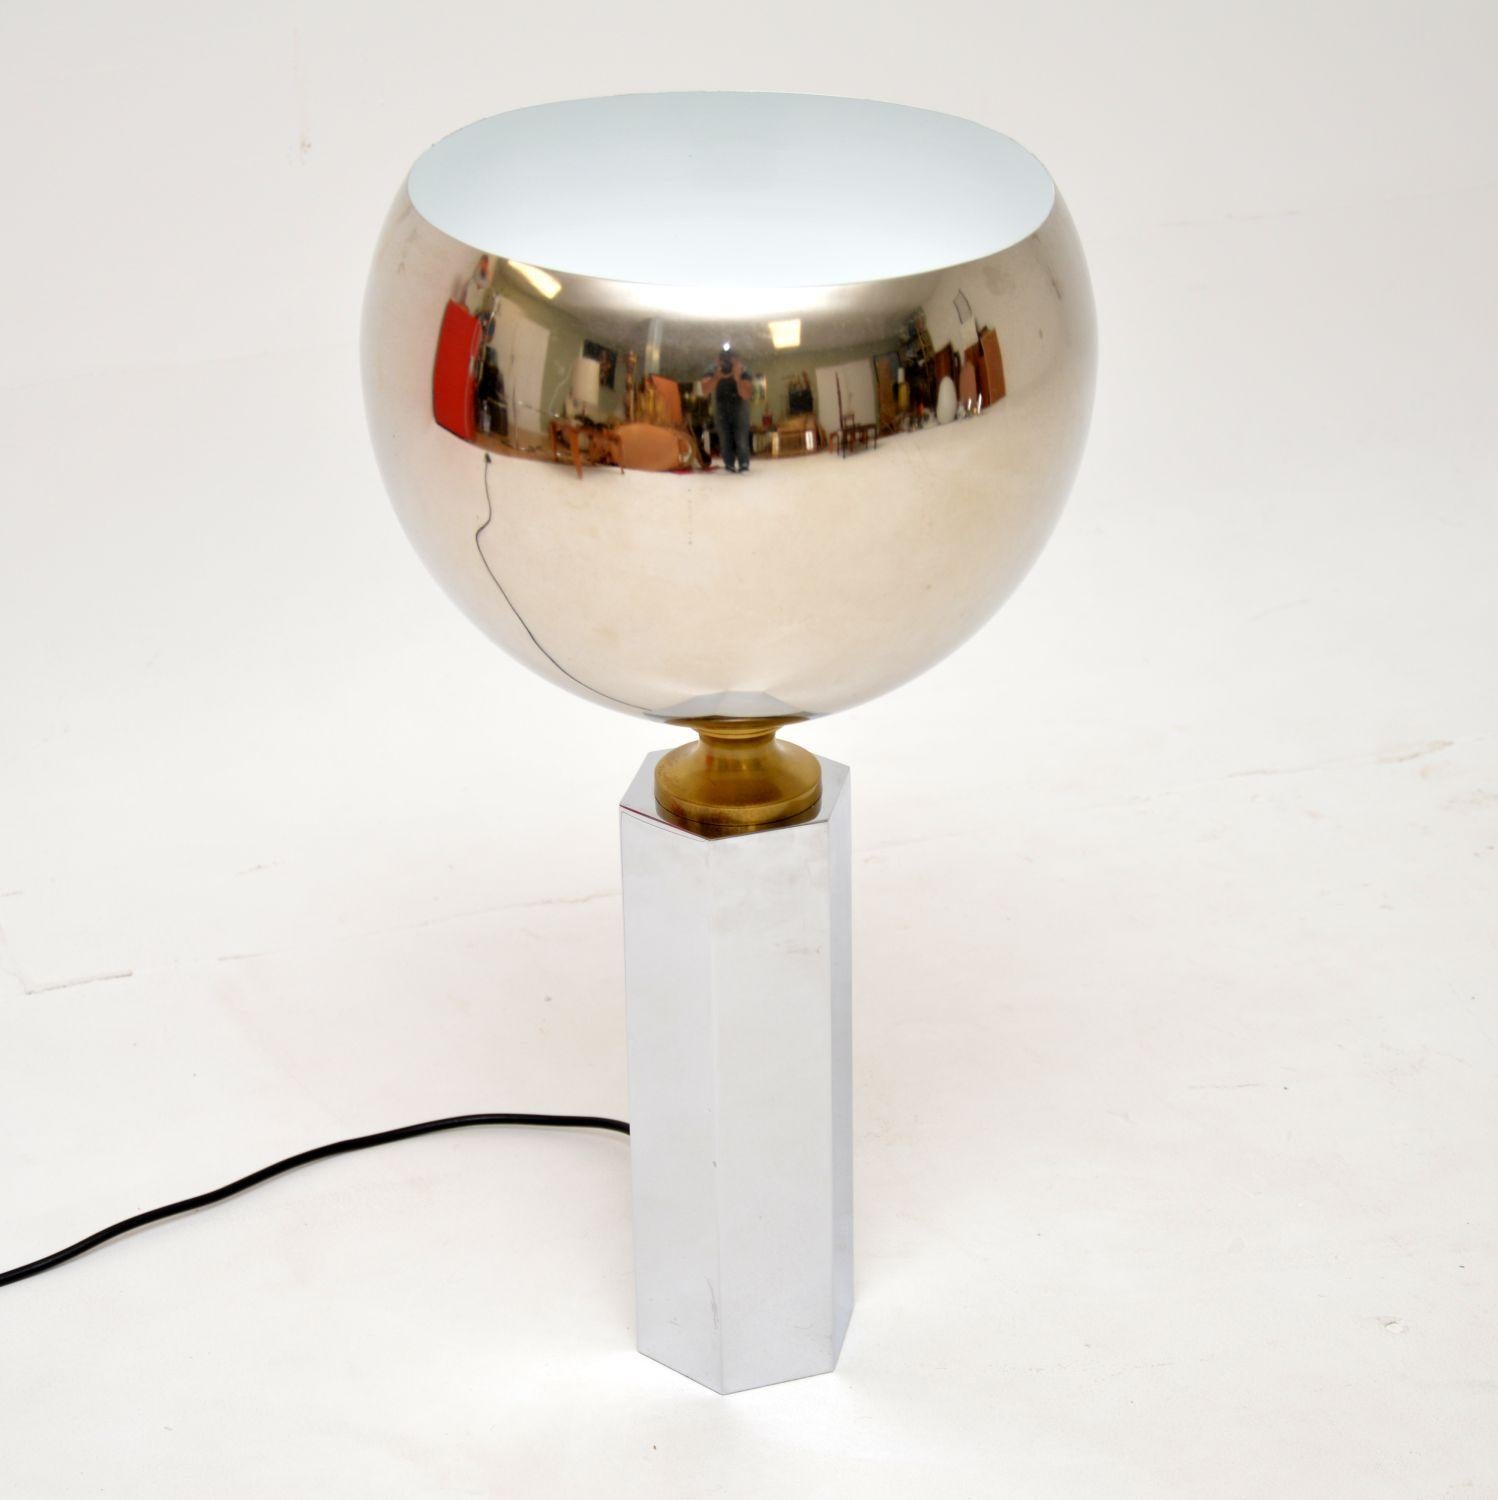 A stunning vintage chrome and brass table lamp, this was made in Europe, likely Italy or France, it dates from the 1970’s.

It is of great quality and has a very striking design. The spherical shade lights upwards, and is connected with a brass